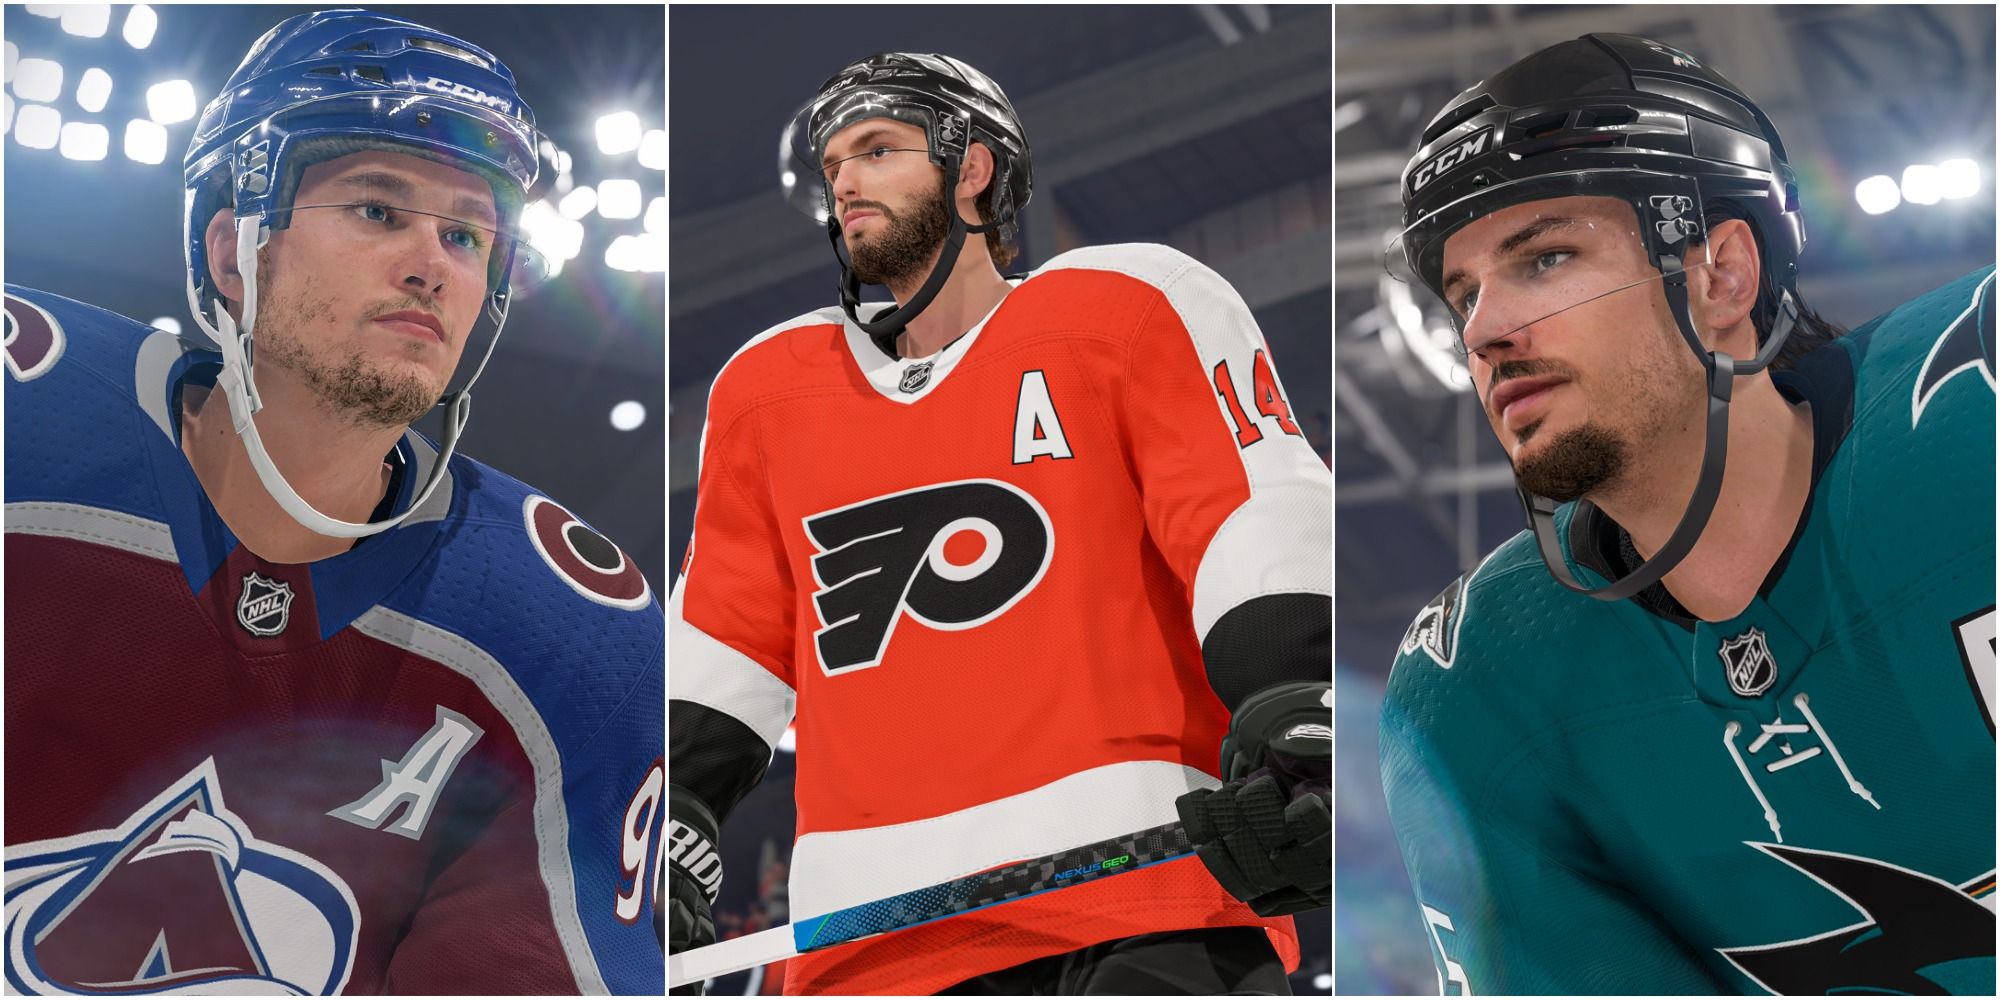 NHL 22 players take the ice